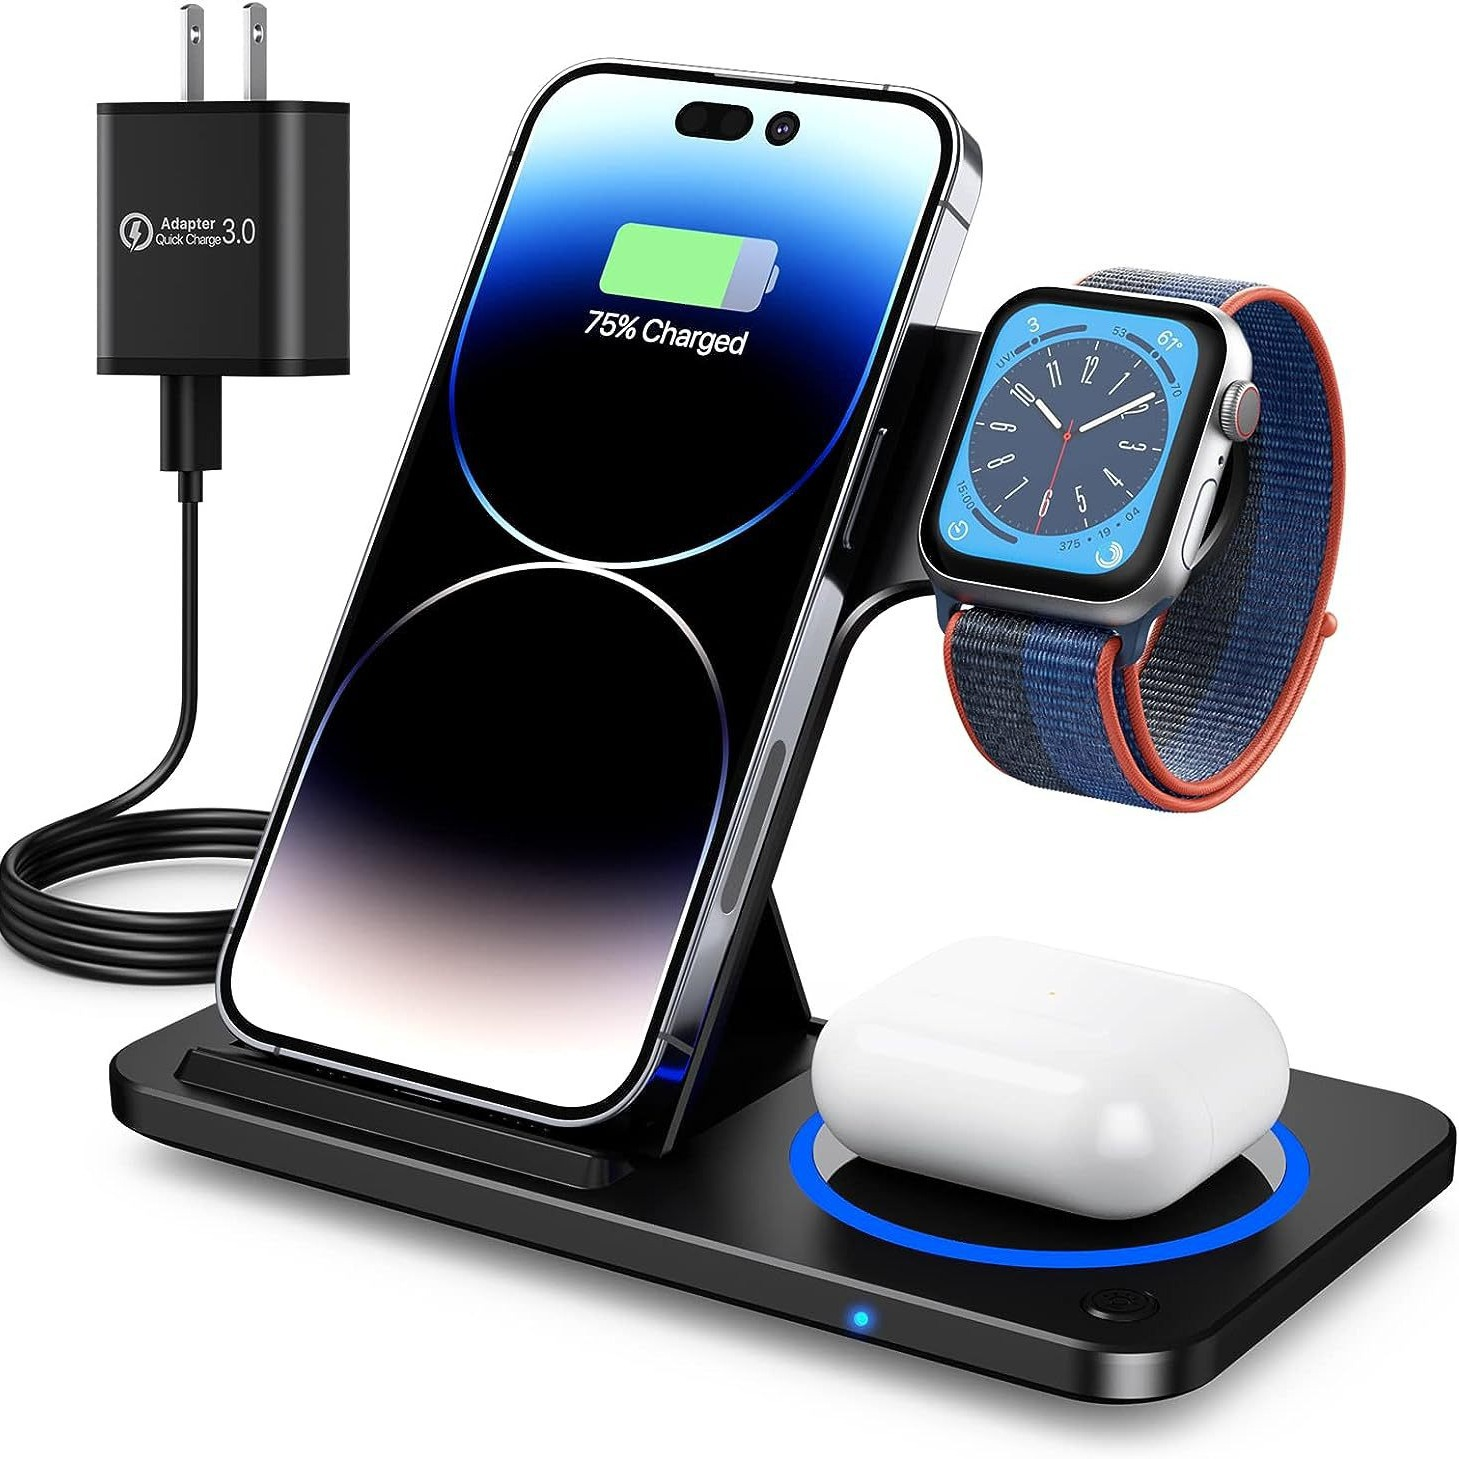 Charging Devices